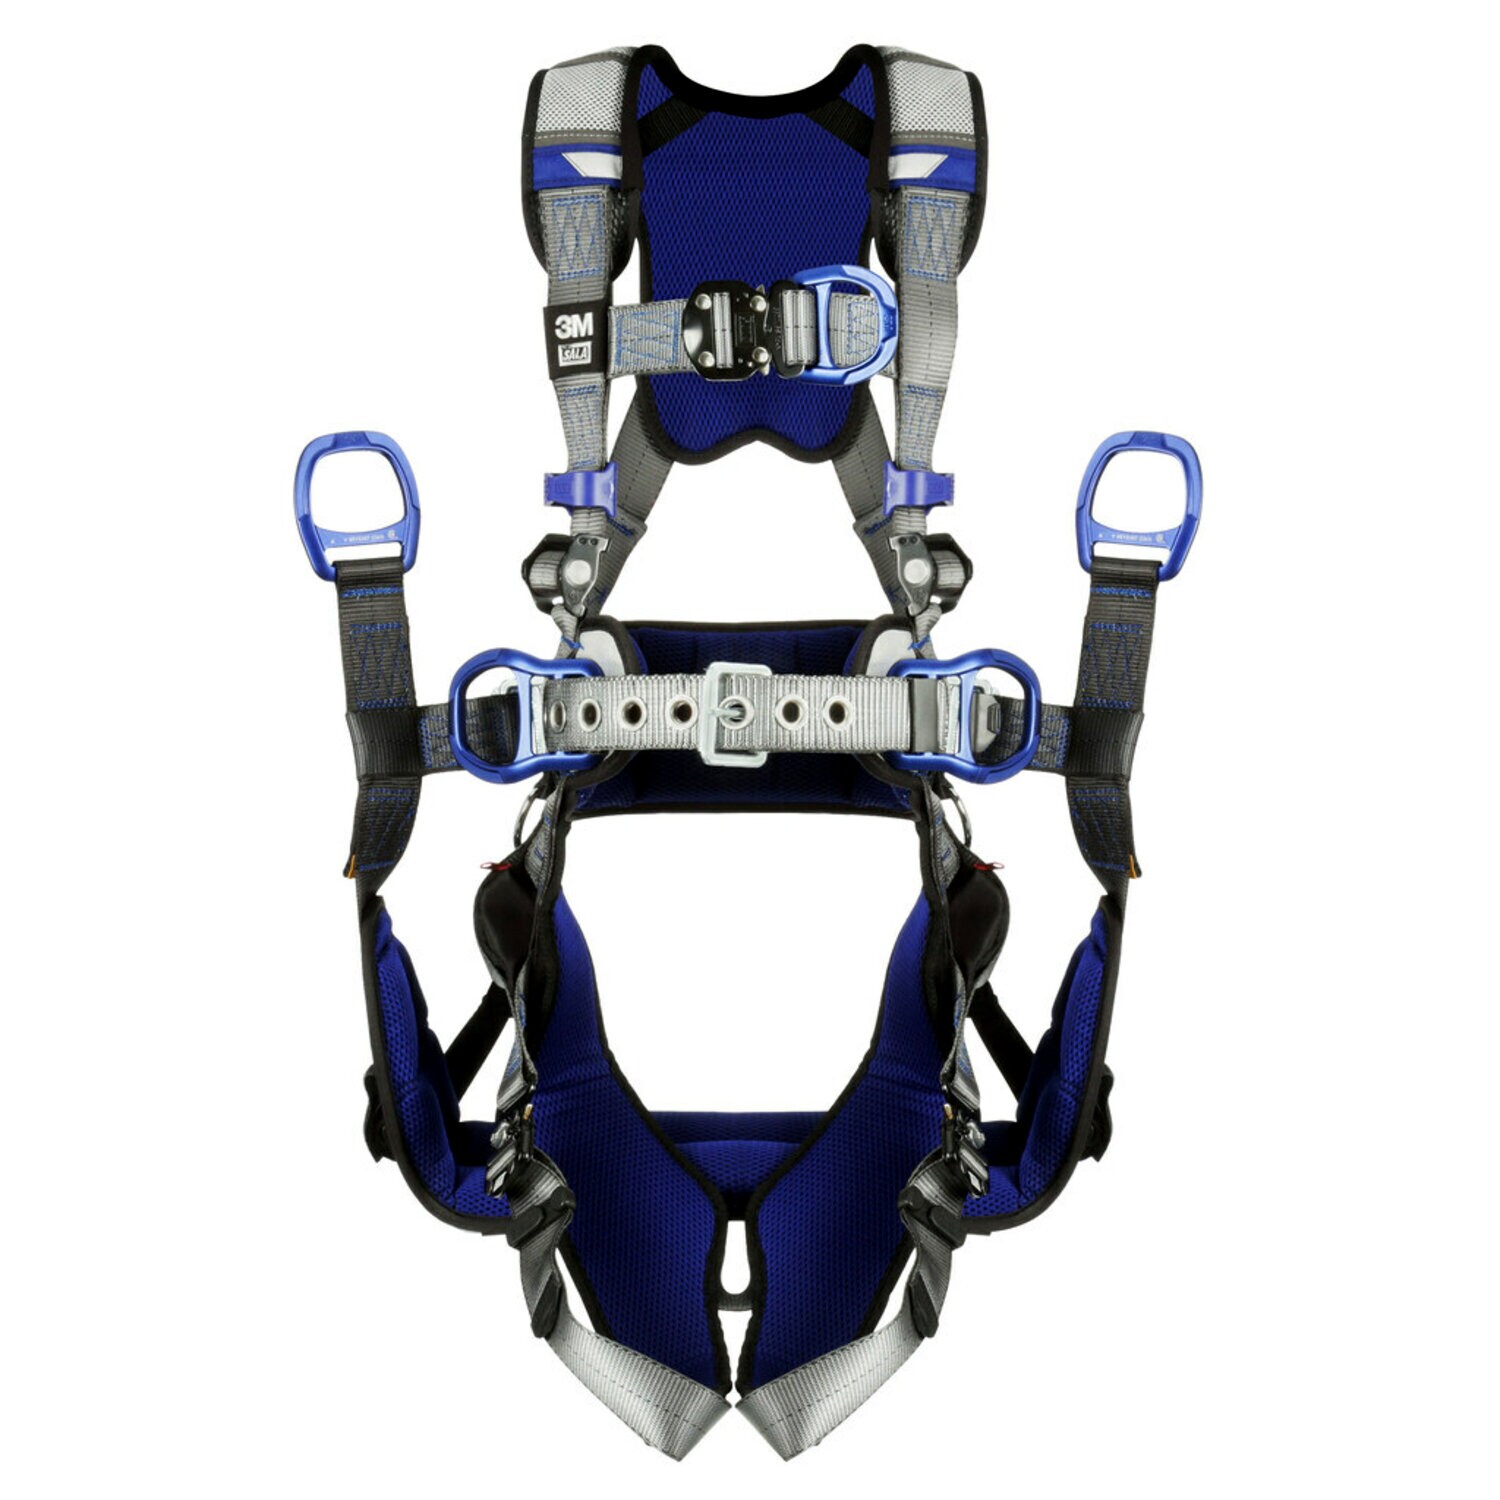 7012817882 - 3M DBI-SALA ExoFit X200 Comfort Tower Climbing/Positioning/Suspension Safety Harness 1402137, Large